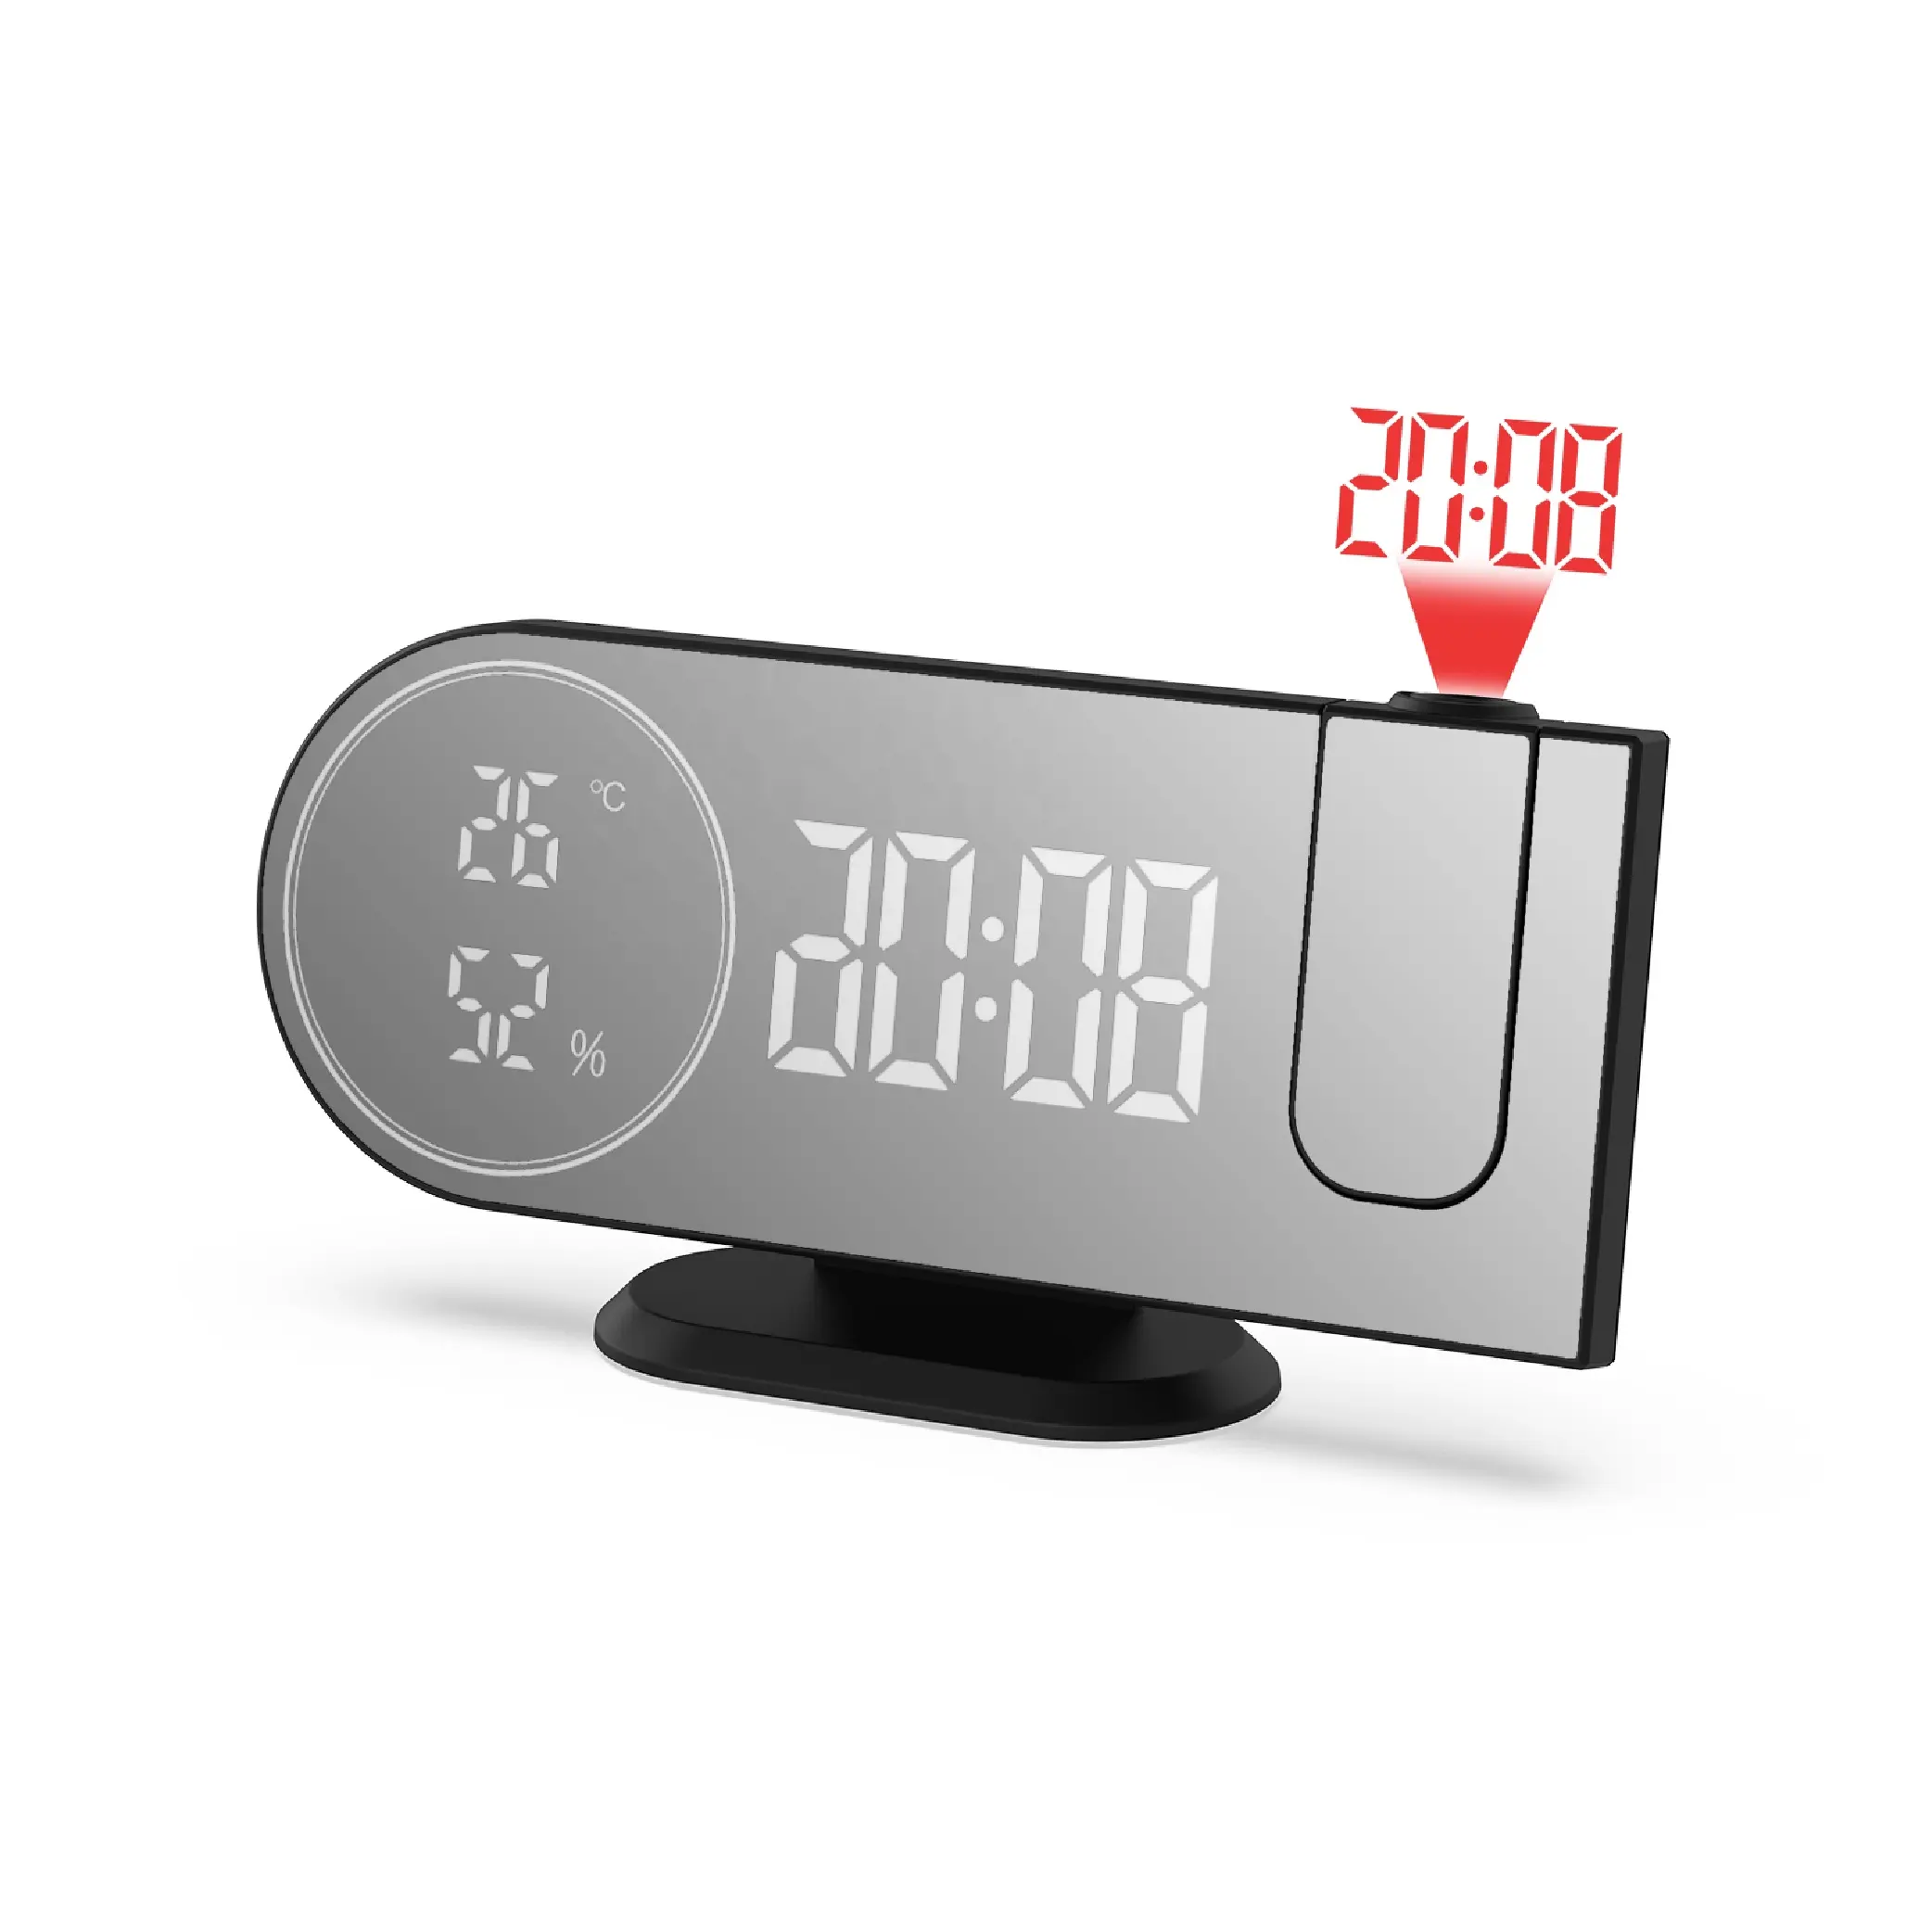 EWETIME NEW Digital Mirror LED Screen Alarm Clock With USB Charging Port Projection For Bathroom Table Desk Case